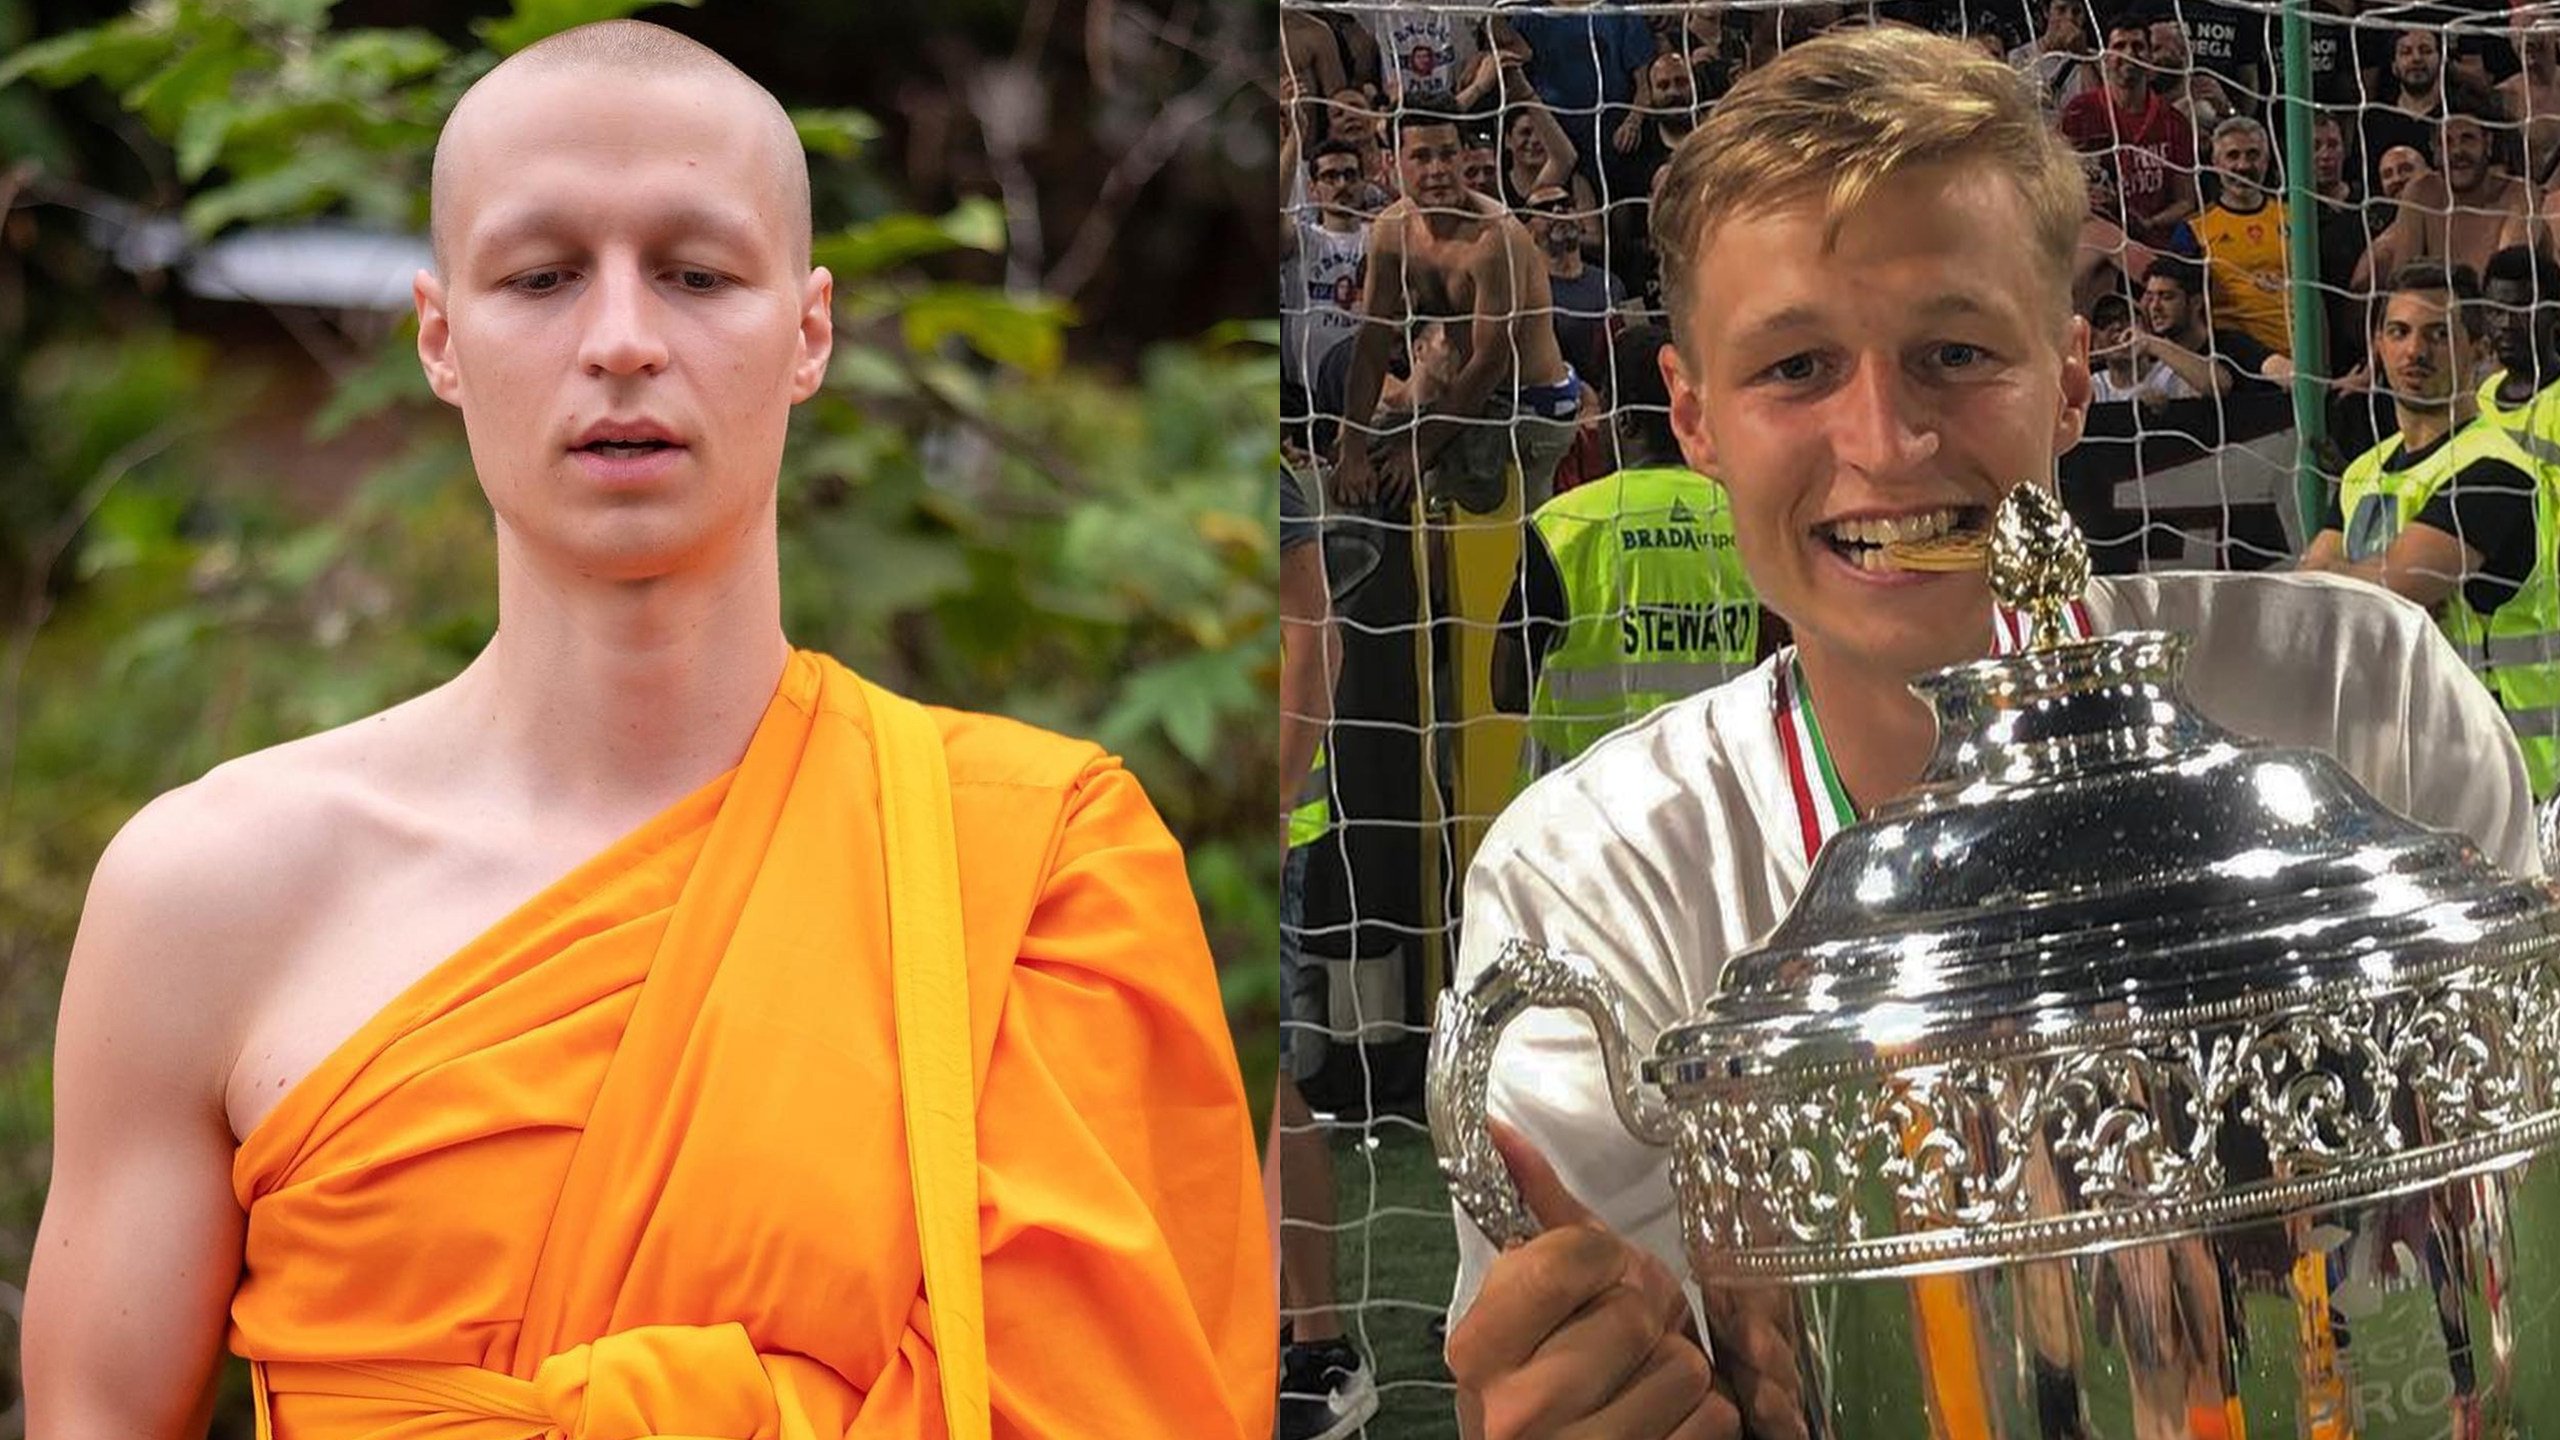 Kevin Lidin’s incredible transformation from footballer to Buddhist monk. Photo: Instagram/kevin_lidin